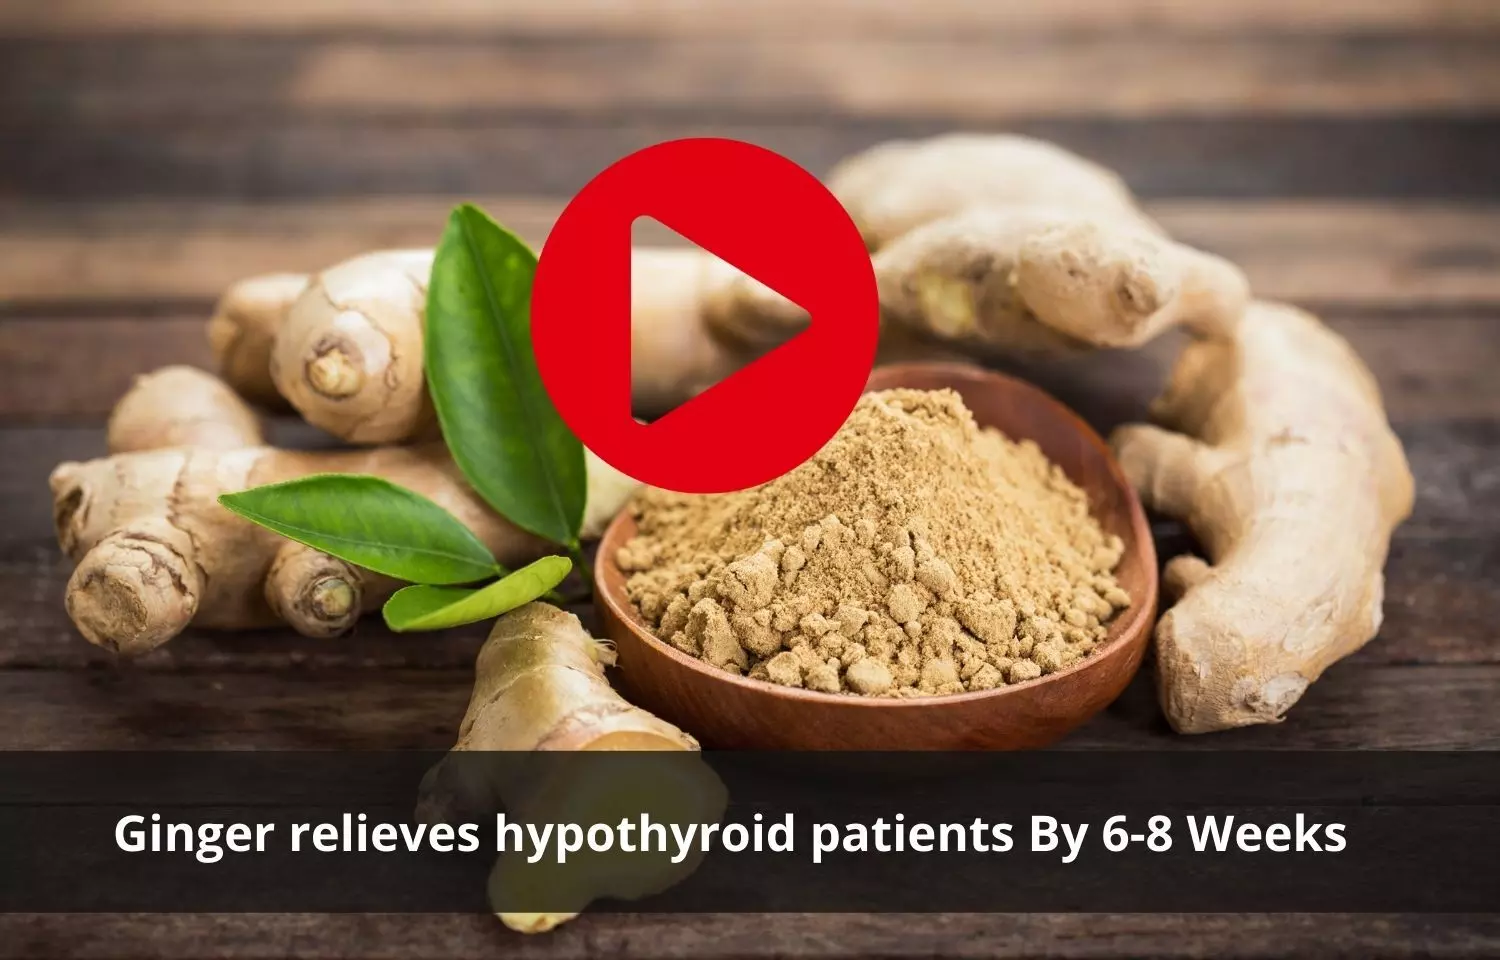 Ginger to help relieve symptoms in hypothyroid patients